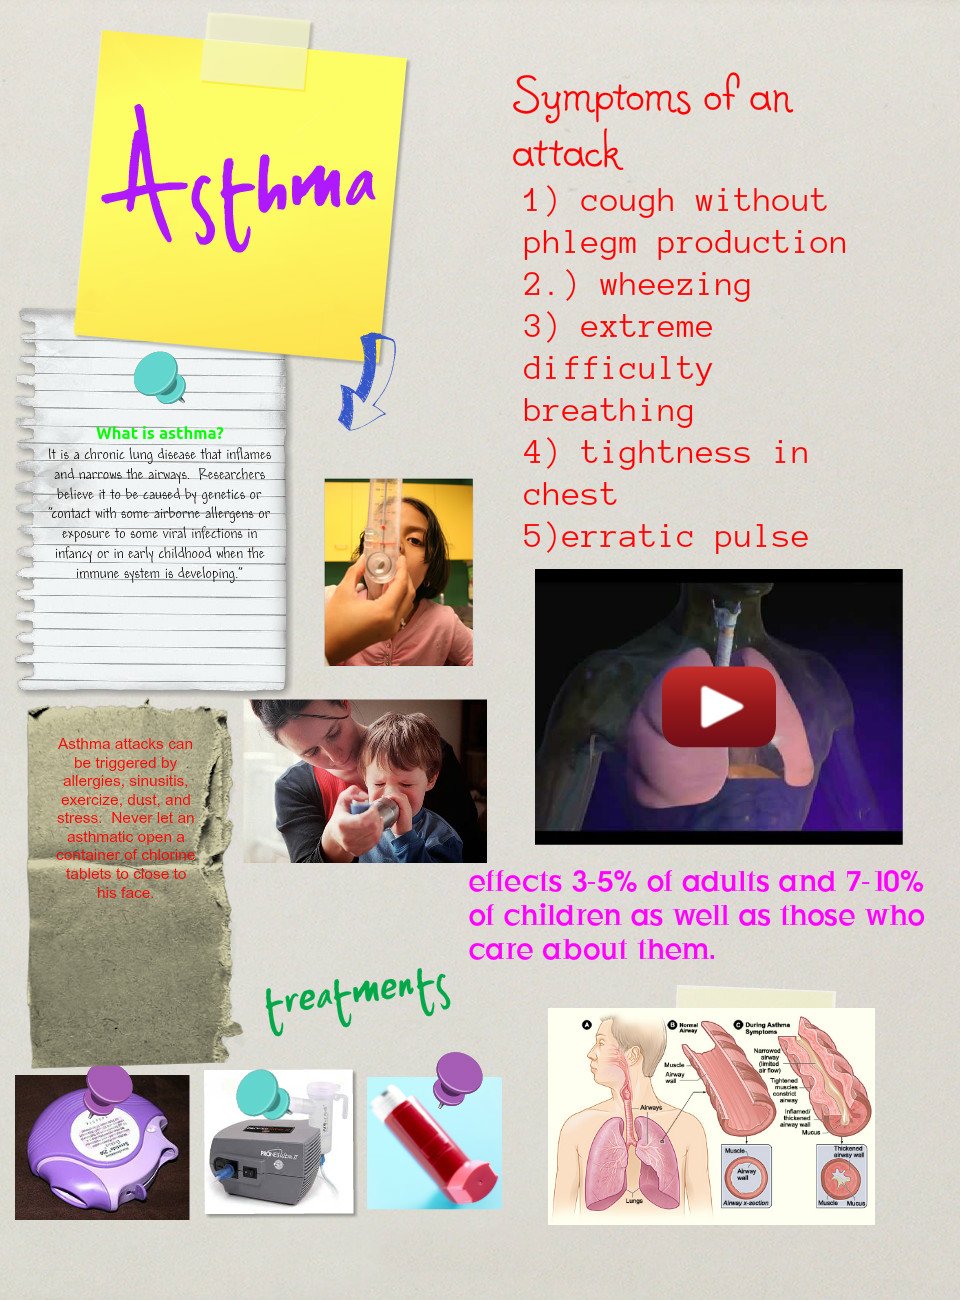 Asthma And Phlegm Production